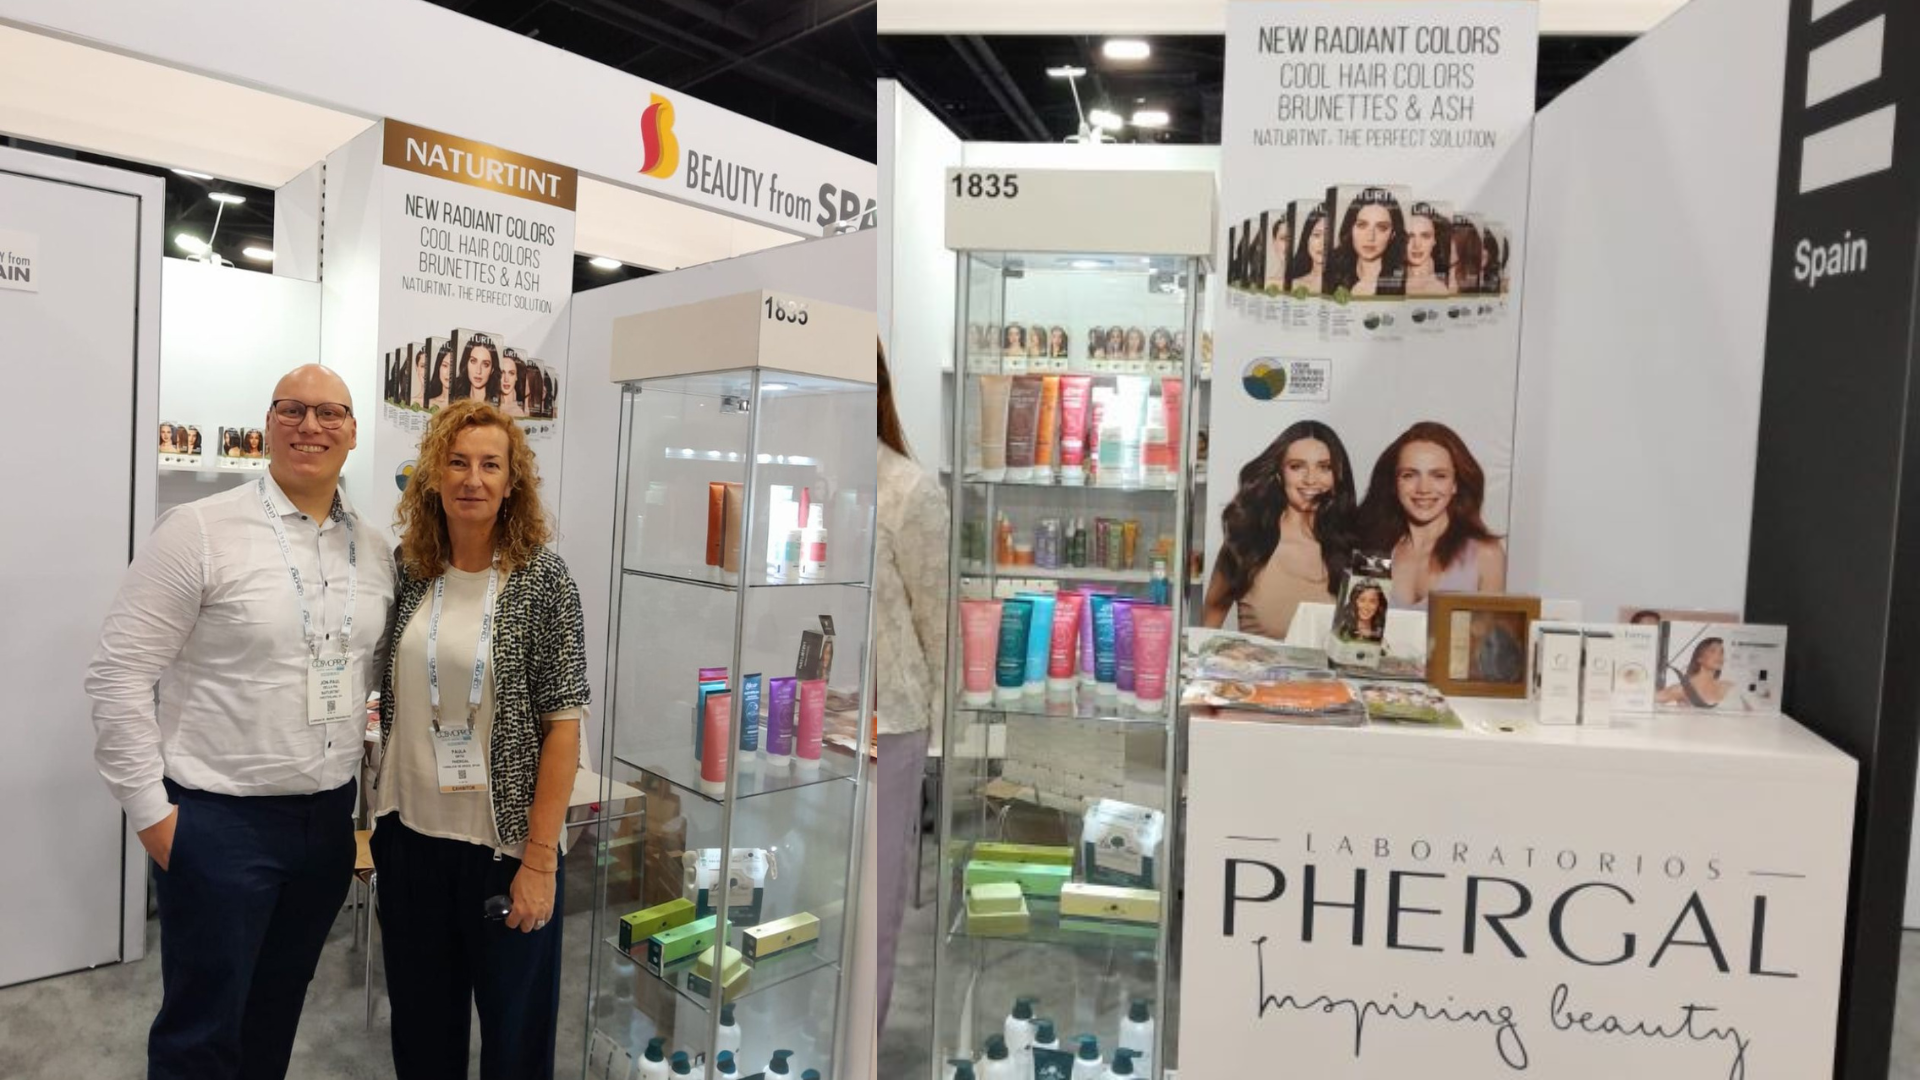 Phergal laboratories stands out at Cosmoprof North America first edition.